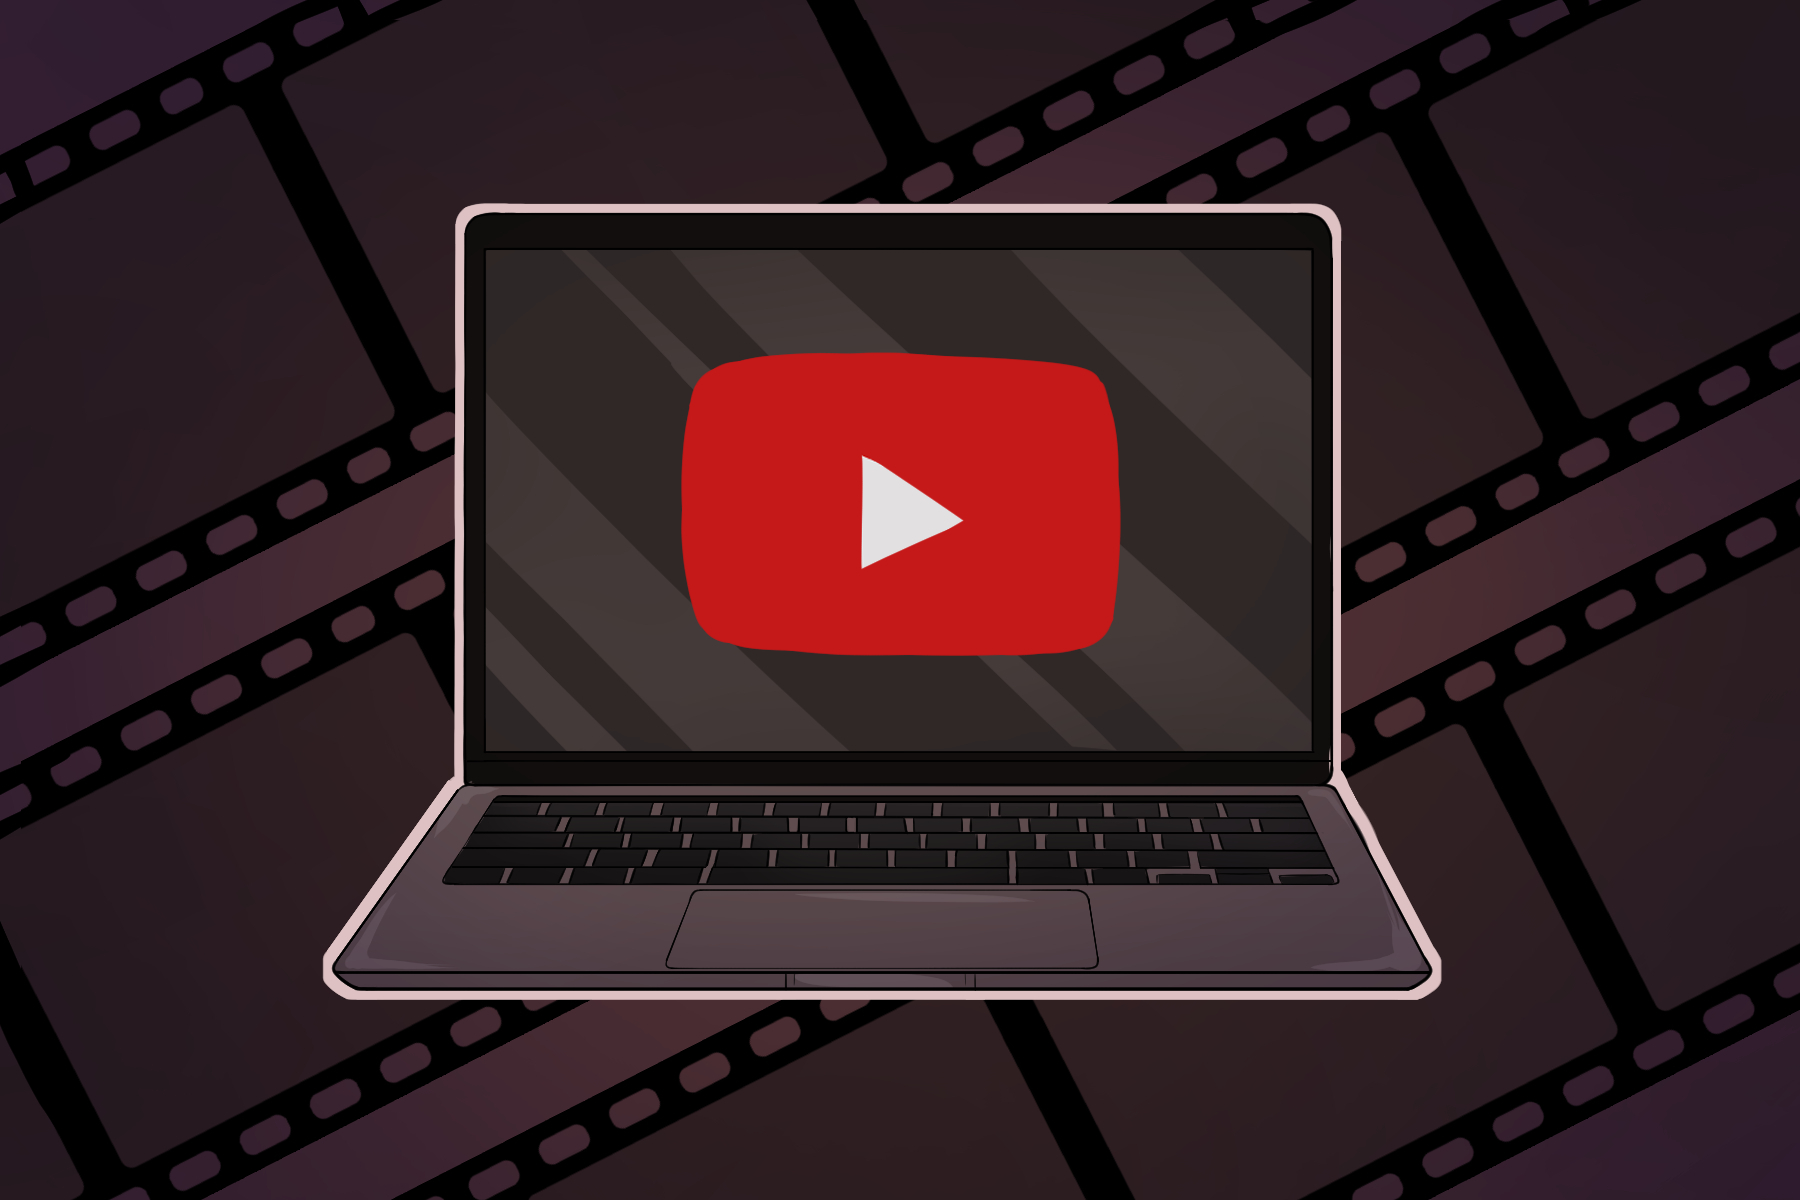 in an article about video essayists, a drawing about video essays shows a computer with the YouTube symbol on its screen.